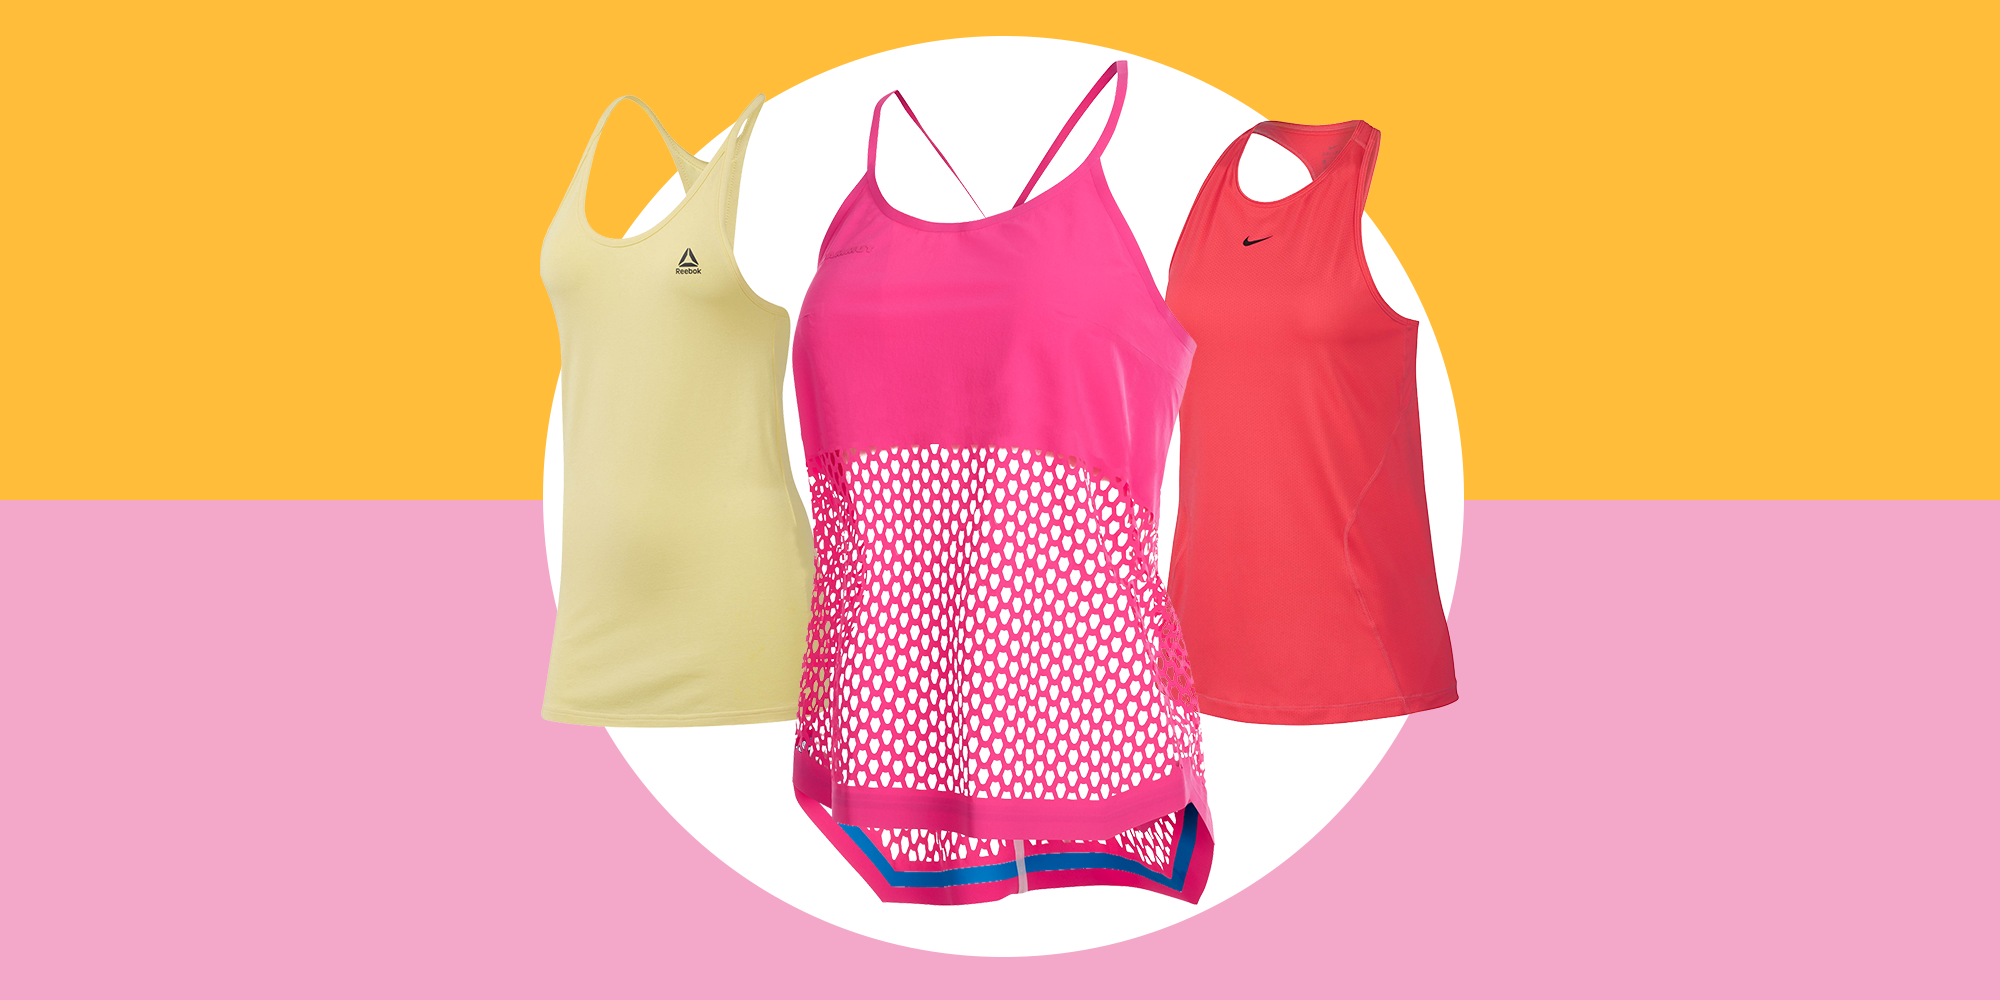 workout tops for women